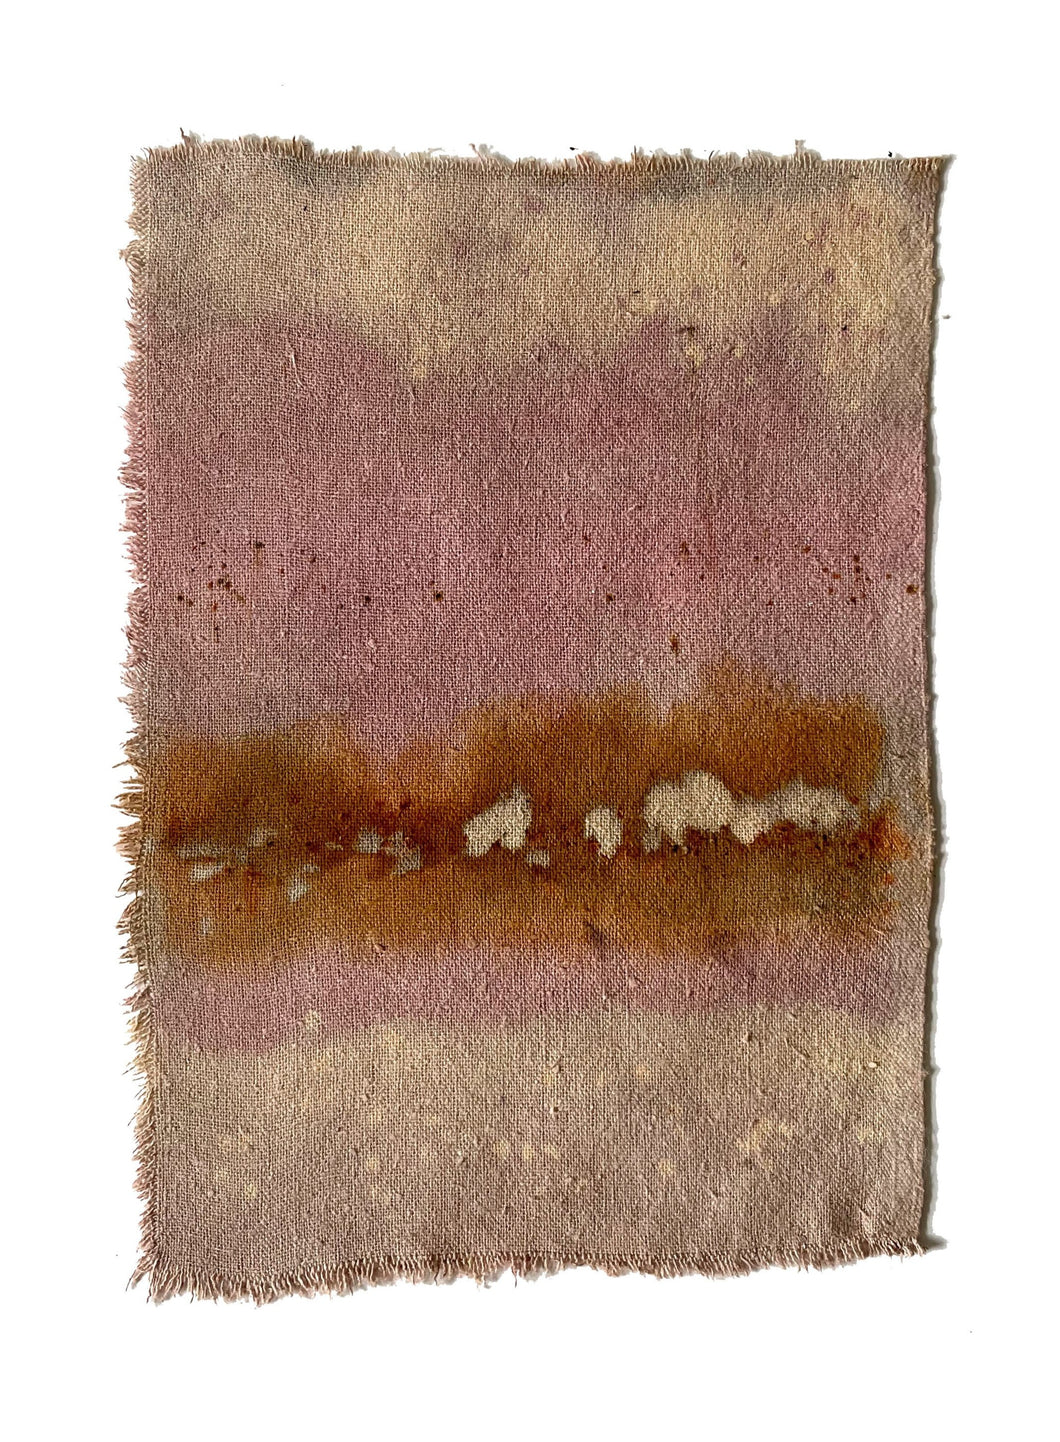 seascape 3 - naturally dyed textile